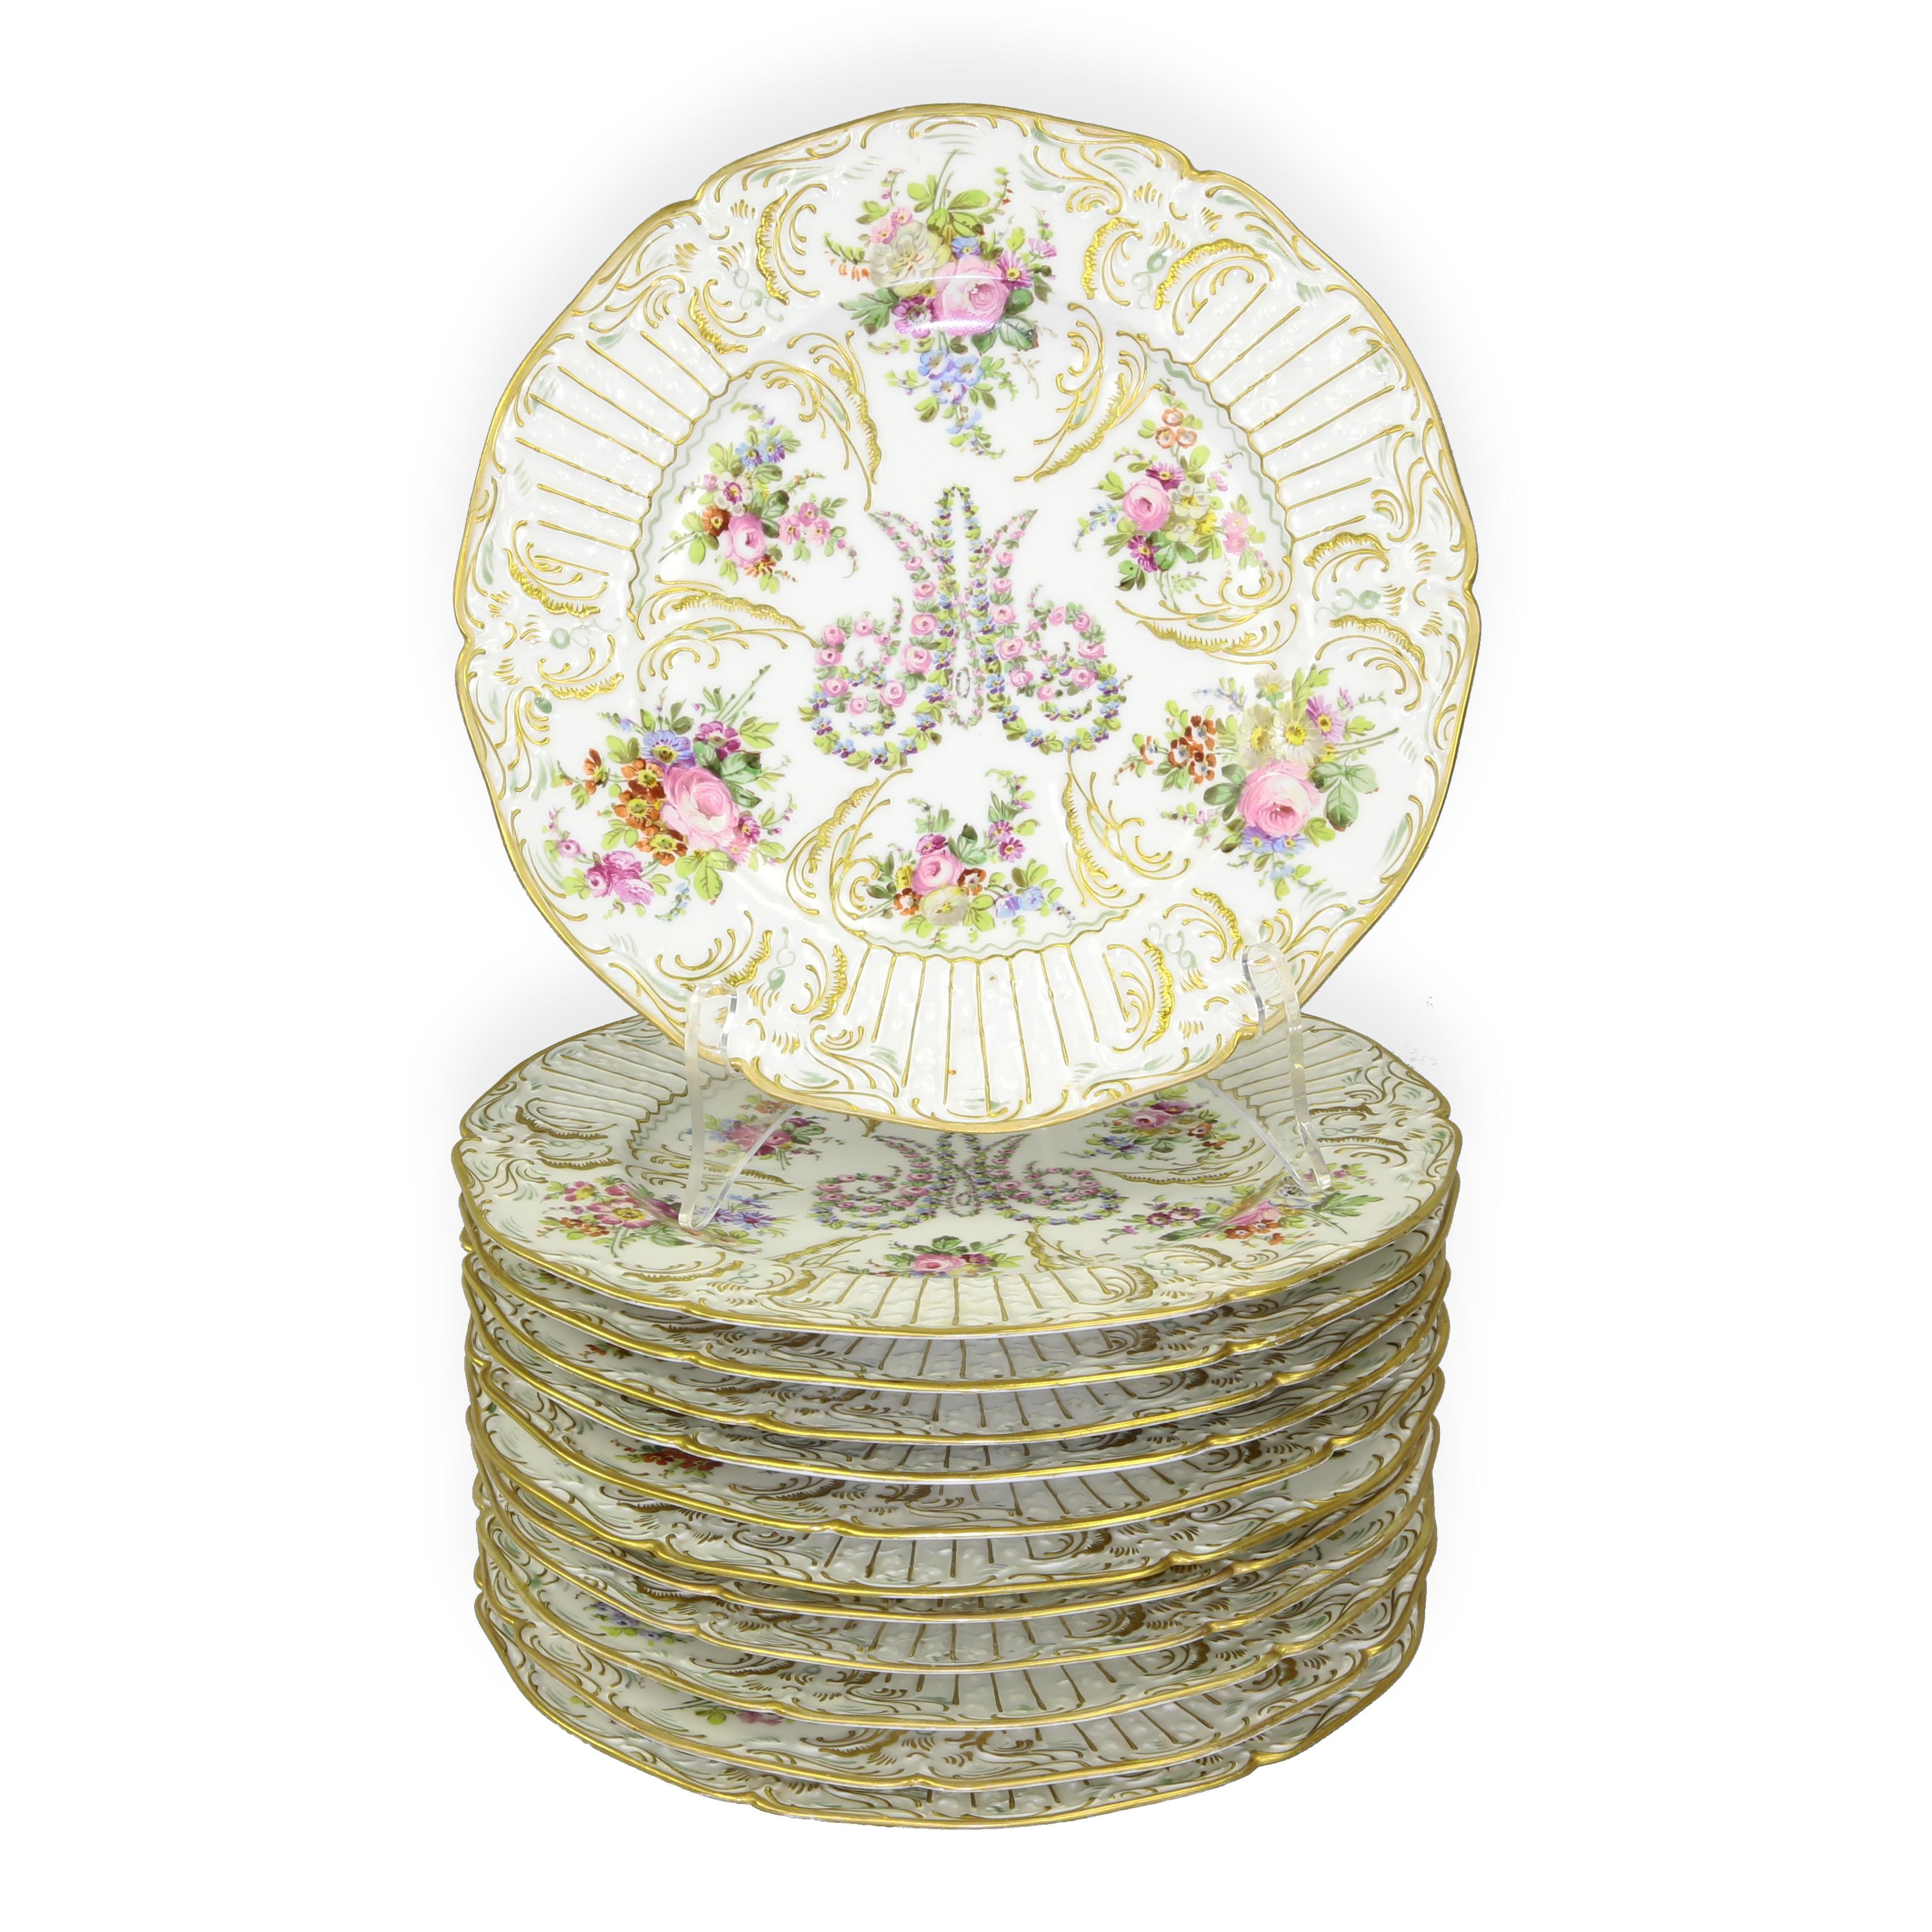 Luxurious antique French porcelain service dinner plates, artfully decorated with beautiful lavish hand painted raised flowers and raised gilt scalloped borders, centring a decorative stylized M. So reminiscent of a springtime garden! Each plate